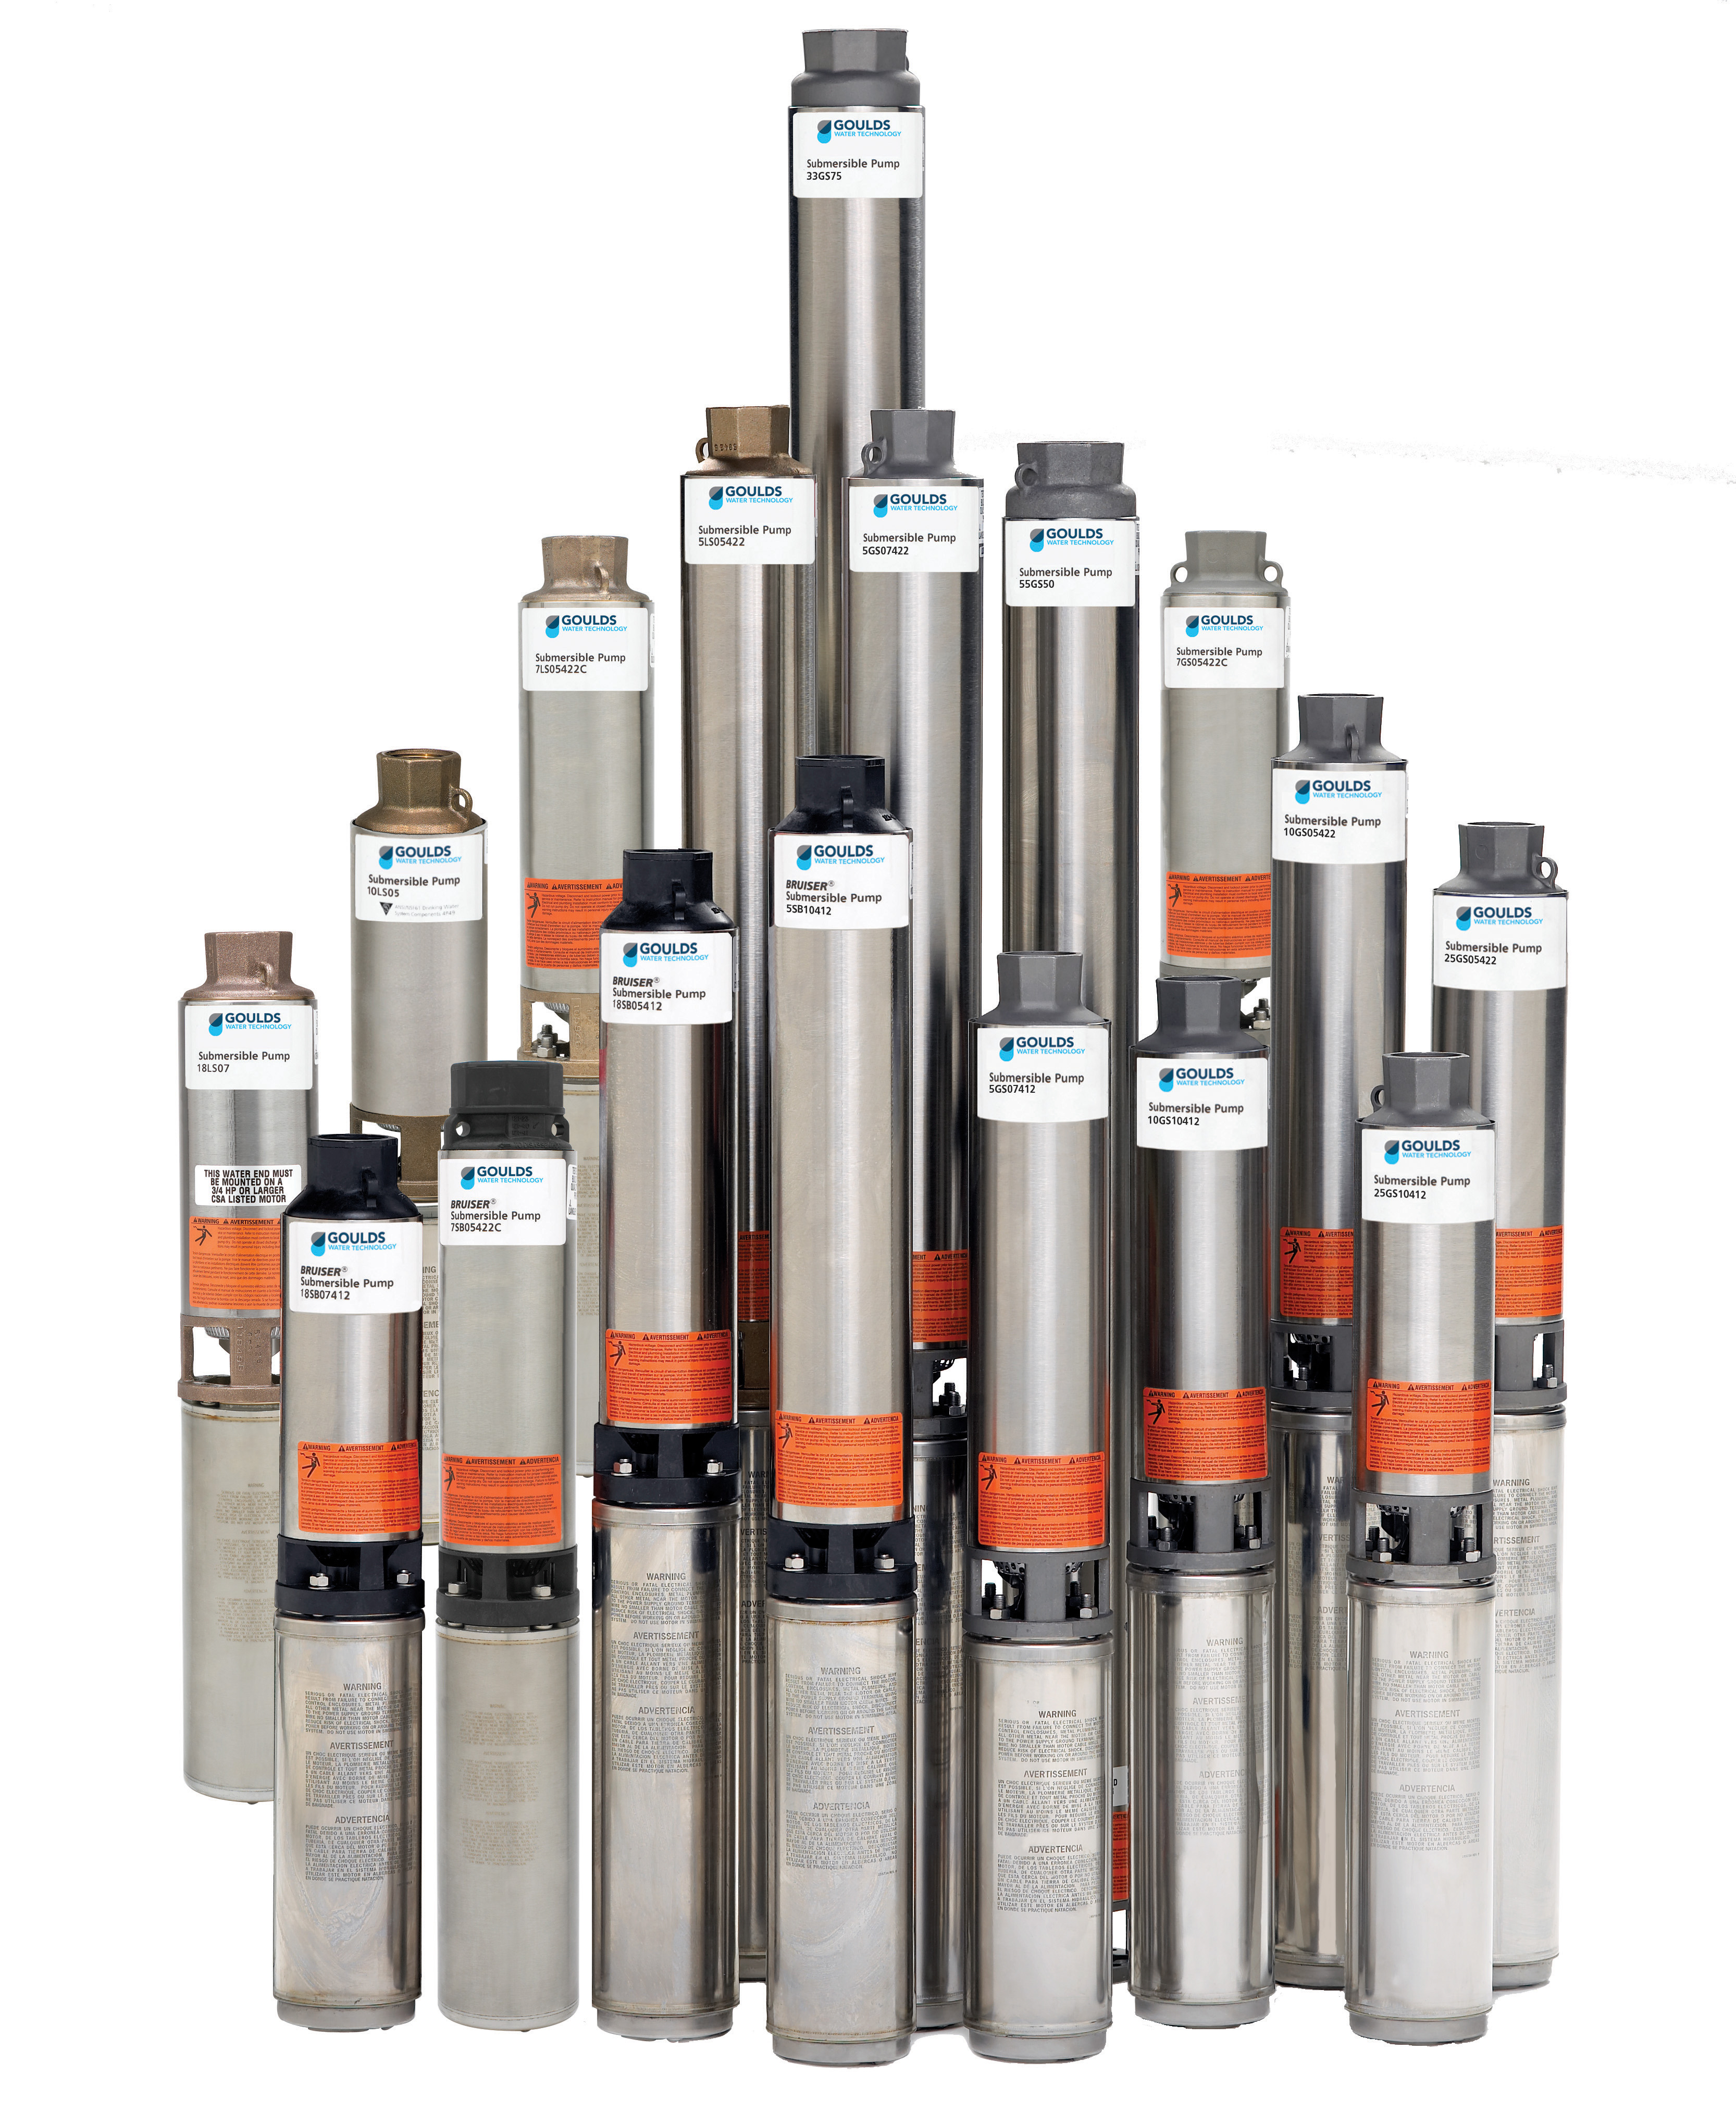 Submersible well pumps